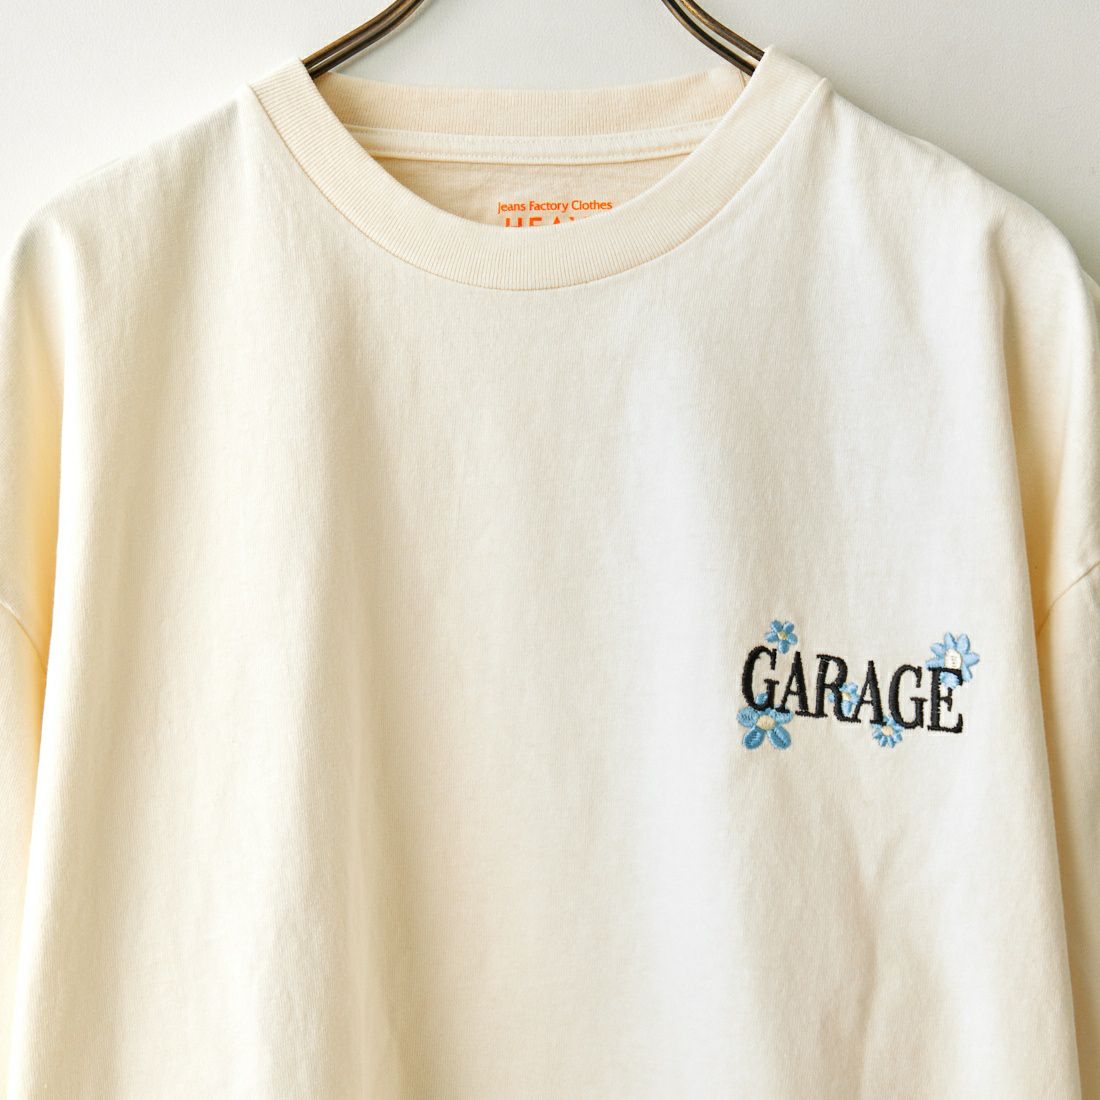 Jeans Factory Clothes [ジーンズファクトリークローズ] DISCOプリントTシャツ [2322-420IN-B] OFF WHITE